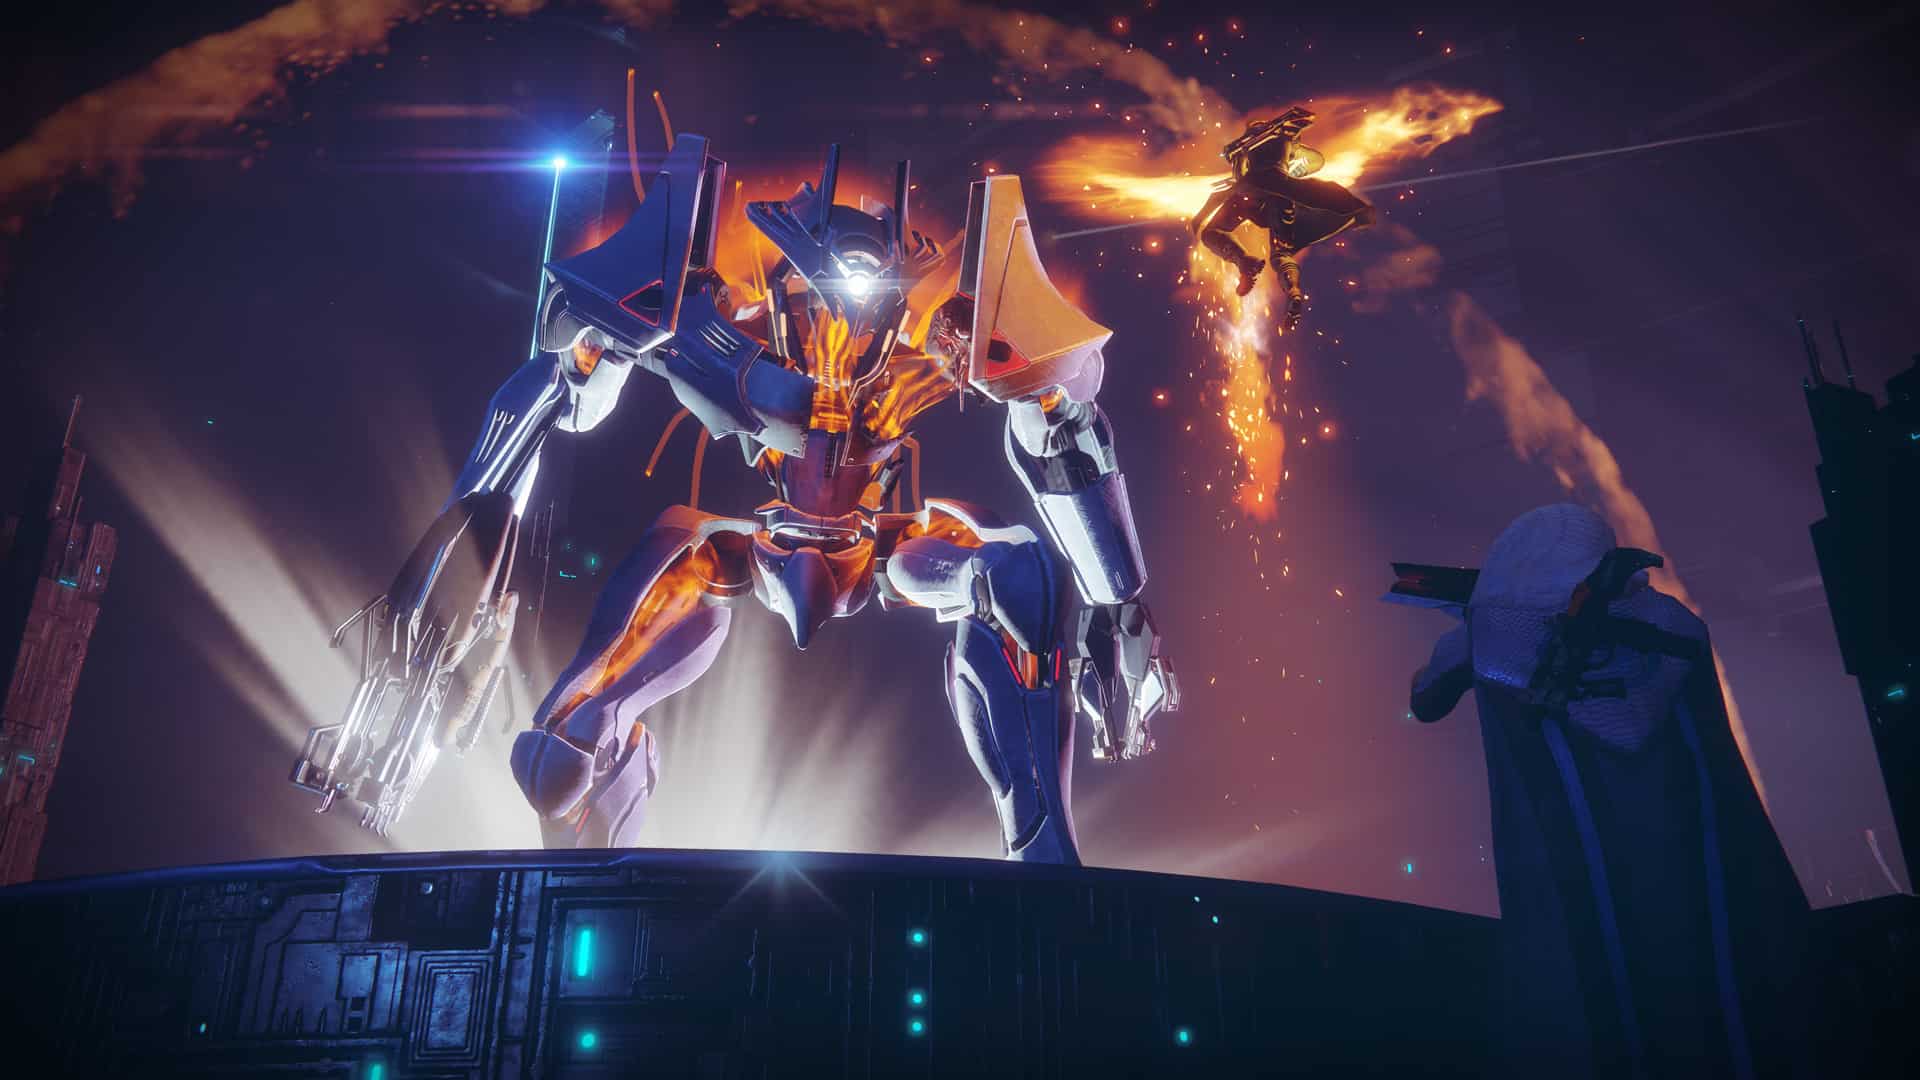 destiny-2-chat-not-working-fixes-workarounds-min